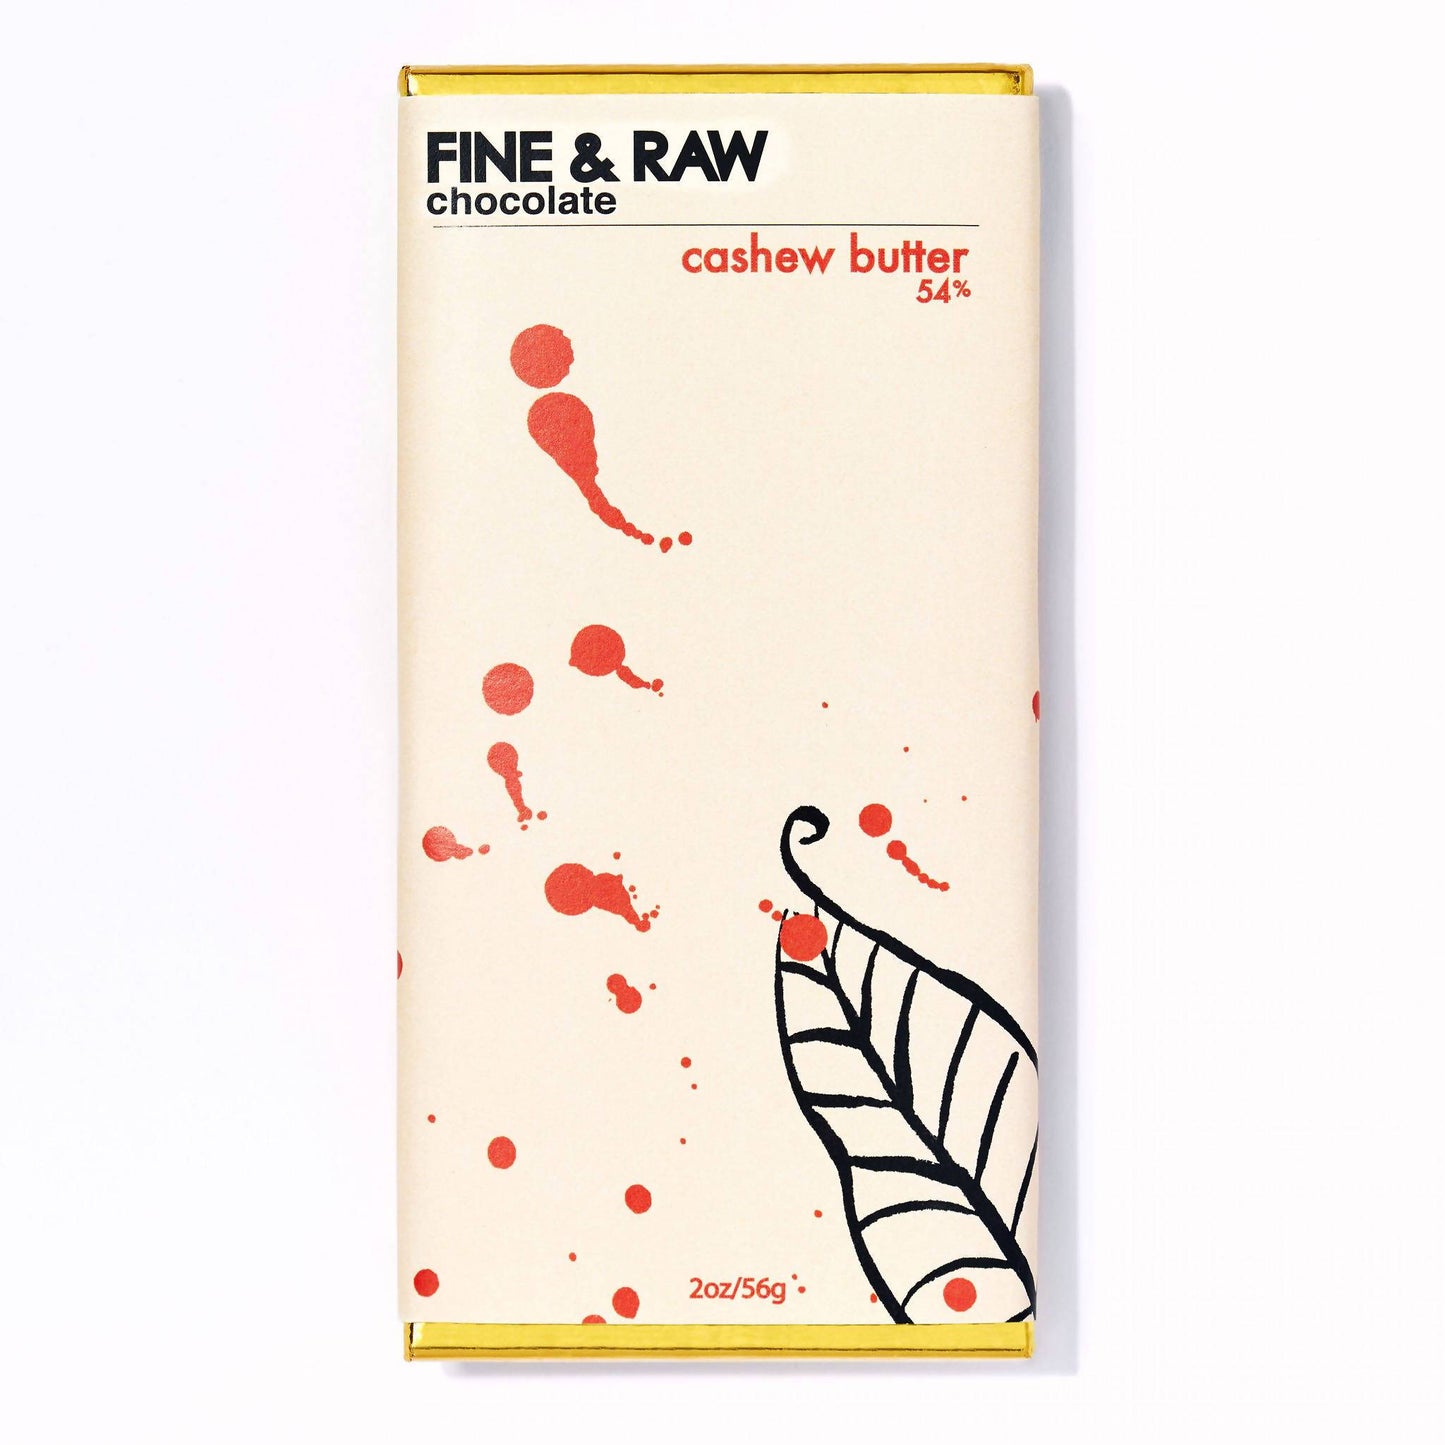 fine and raw chocolate bars, cashew butter filled, organic (54% cocoa / cacao) - 10 bars x 2oz by farm2me